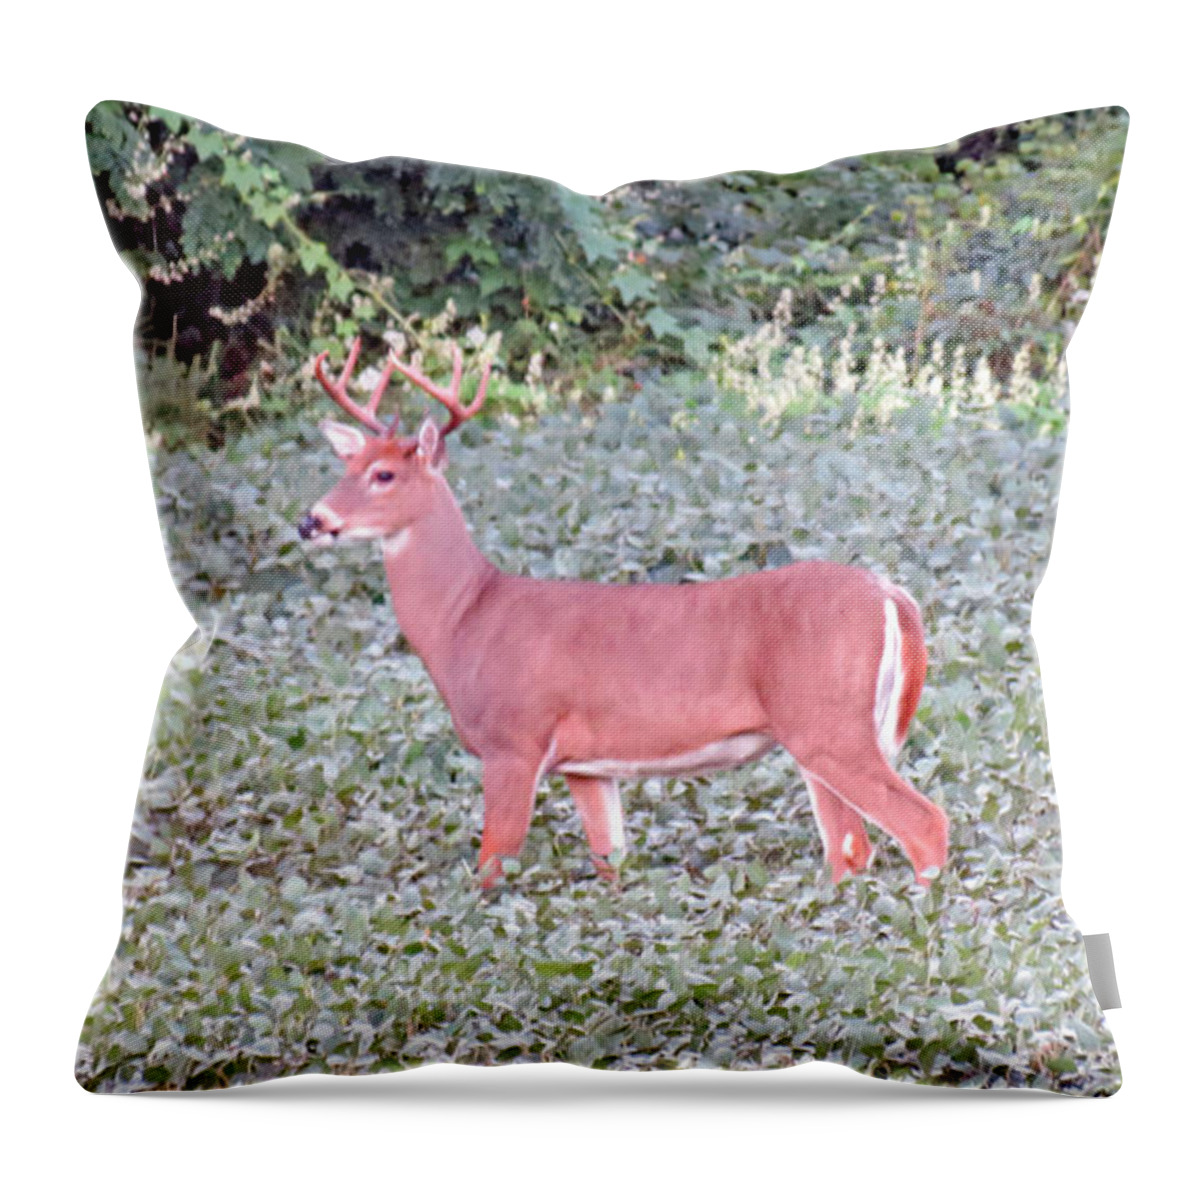 Deer Throw Pillow featuring the photograph Whitetail Buck In The Soybean Field by Kay Novy